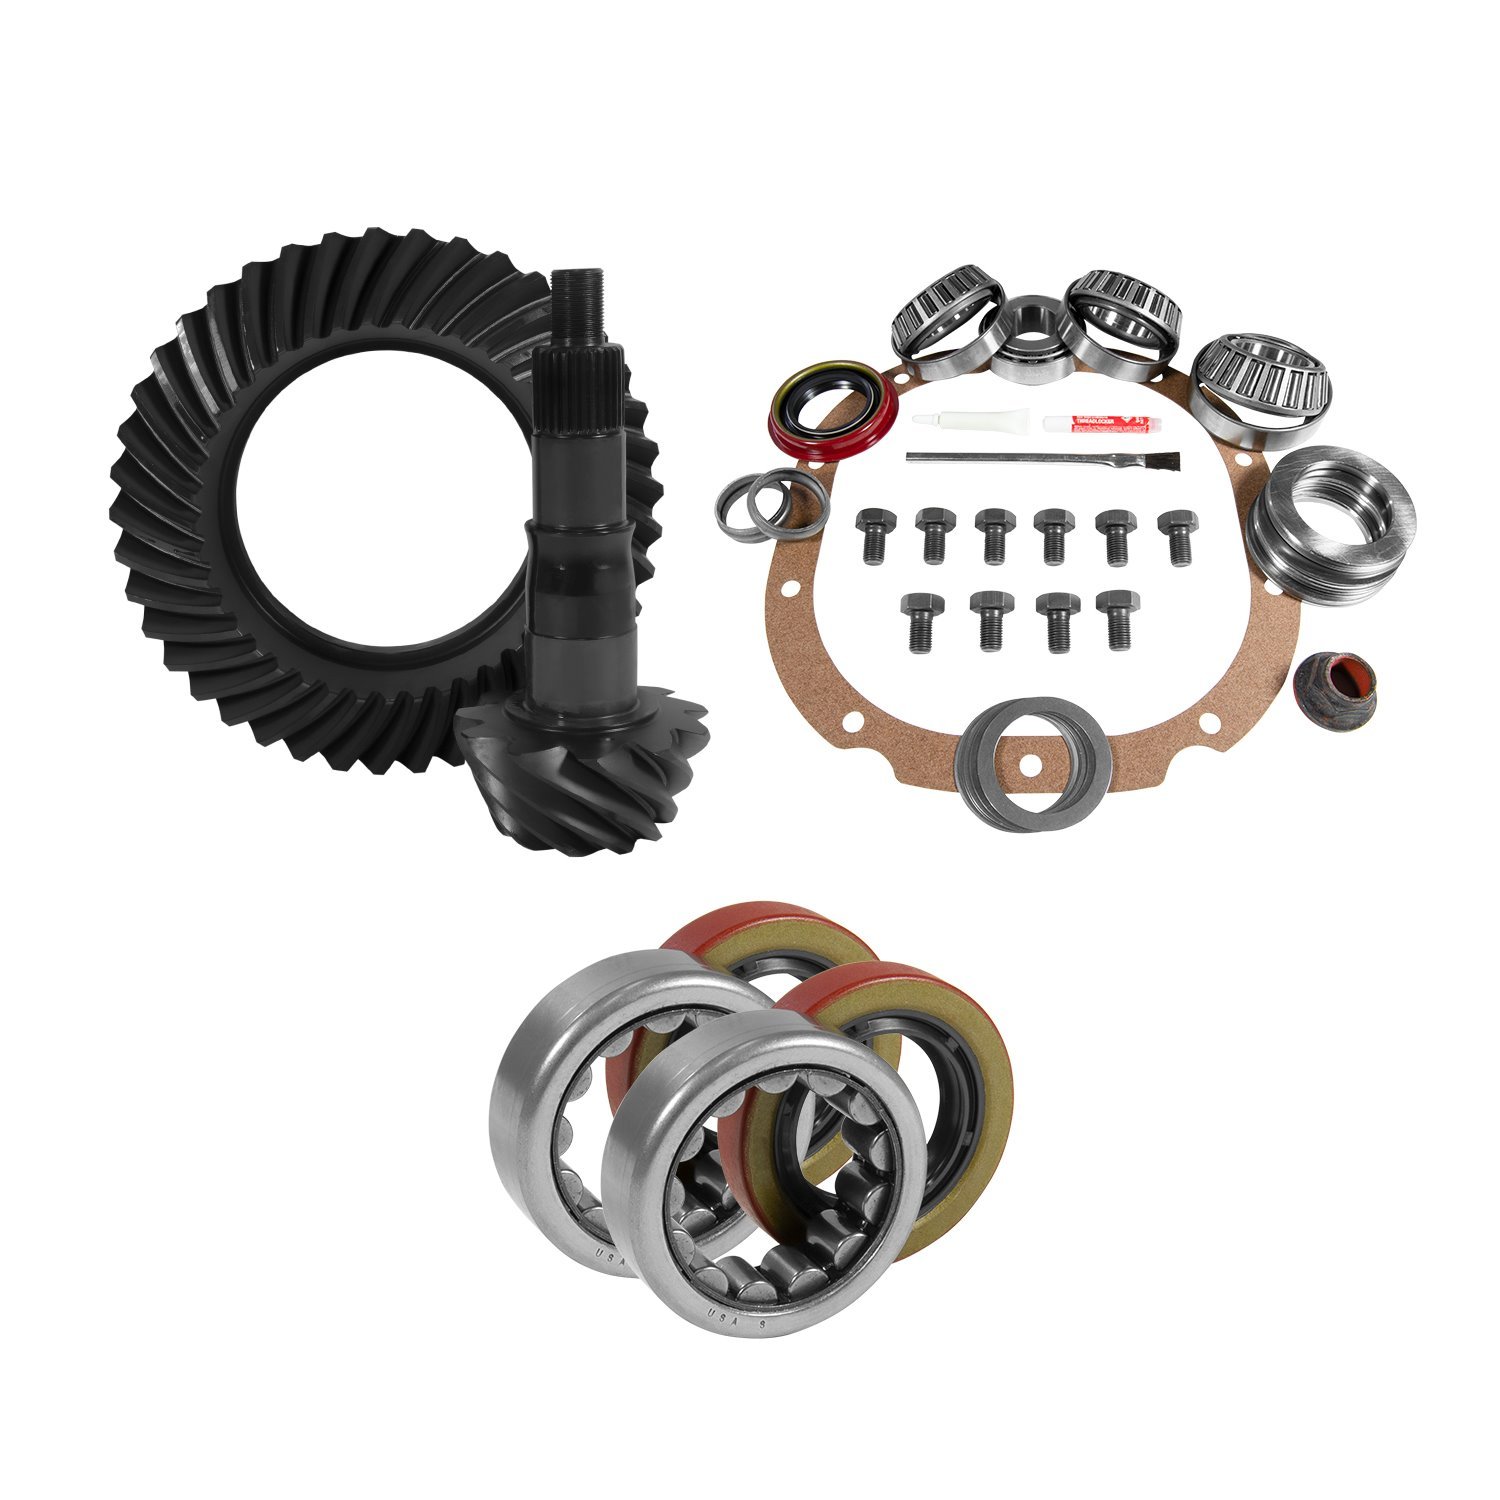 Muscle Car Re-Gear Kit For Ford 8.8 in. Differential, 30 Spline, 4.56 Ratio